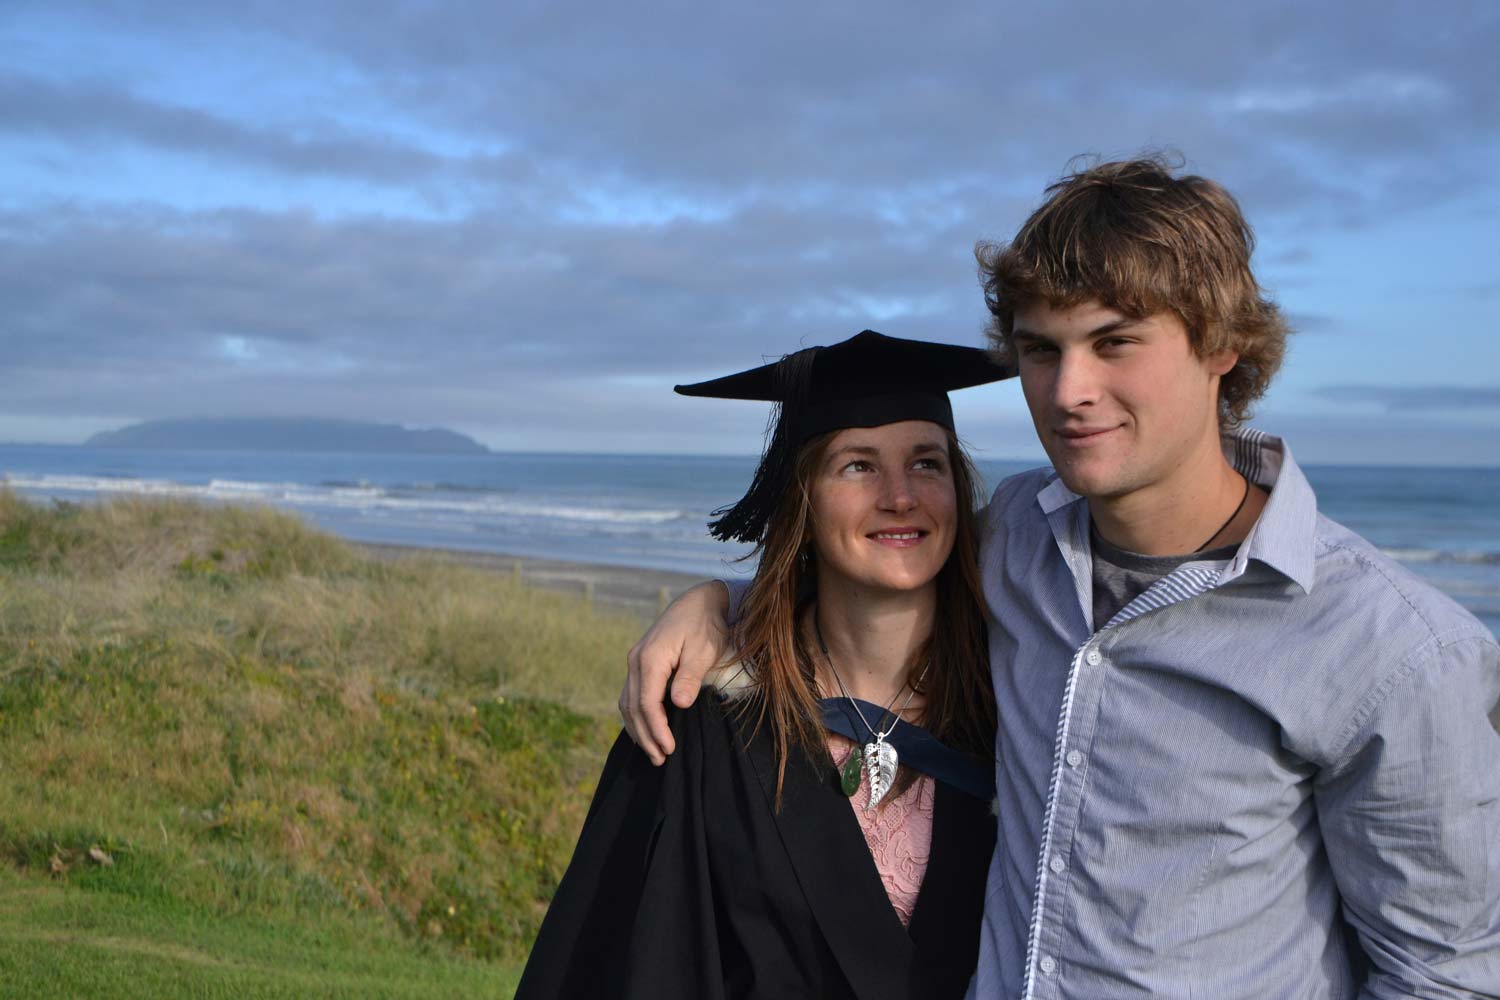 Louise and Ryan at Otaki Beach on her graduation day. She graduated with a bachelor of arts from Massey University.